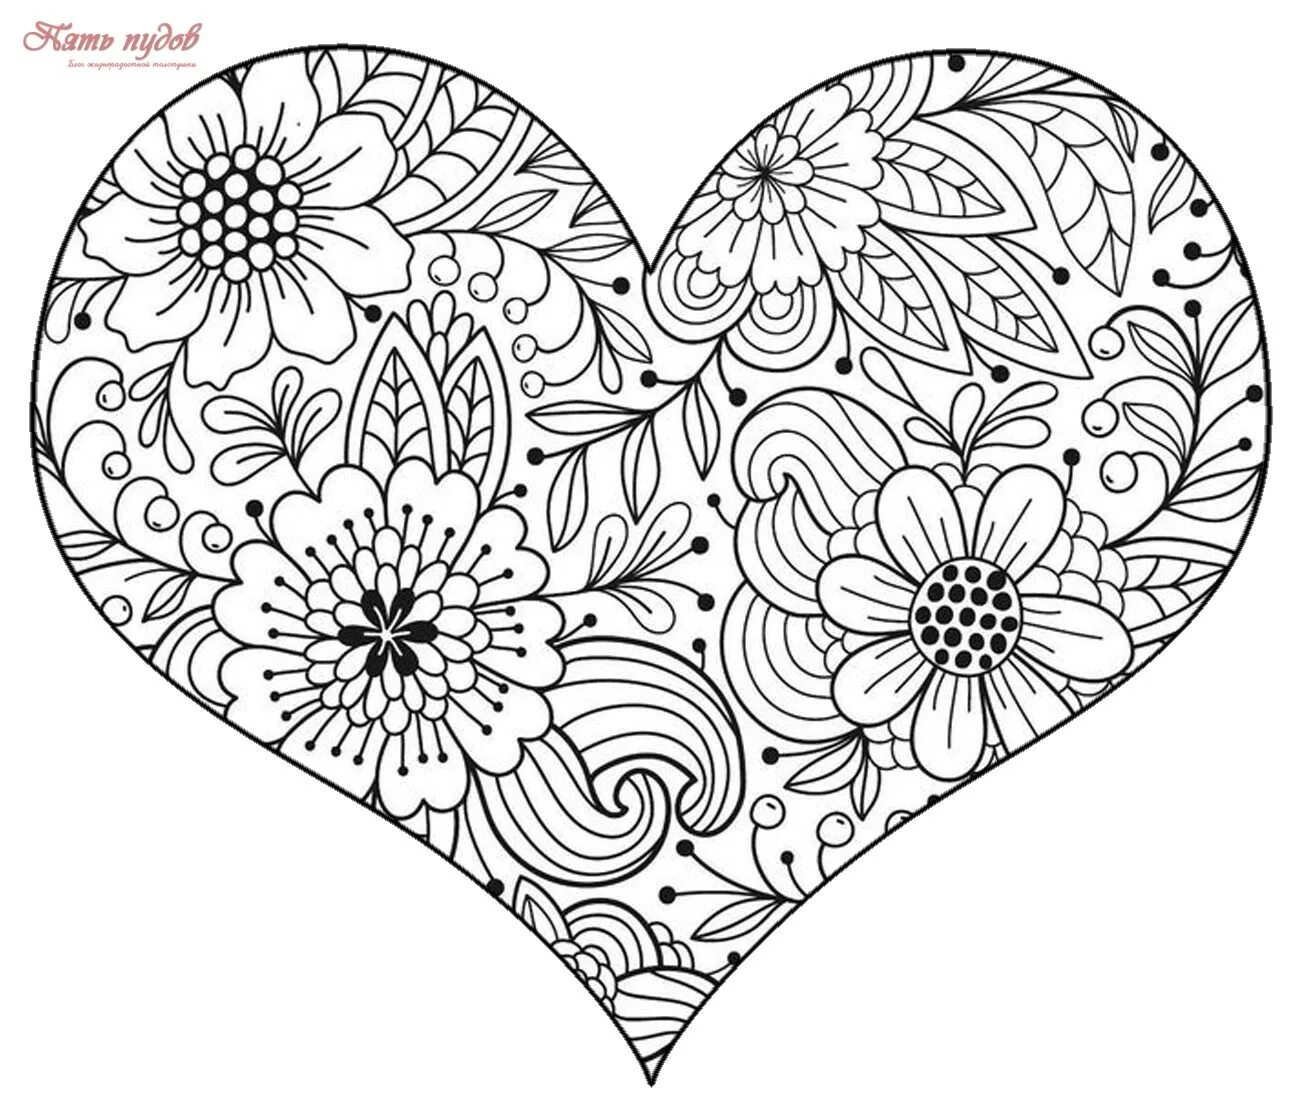 Playful intricate heart coloring